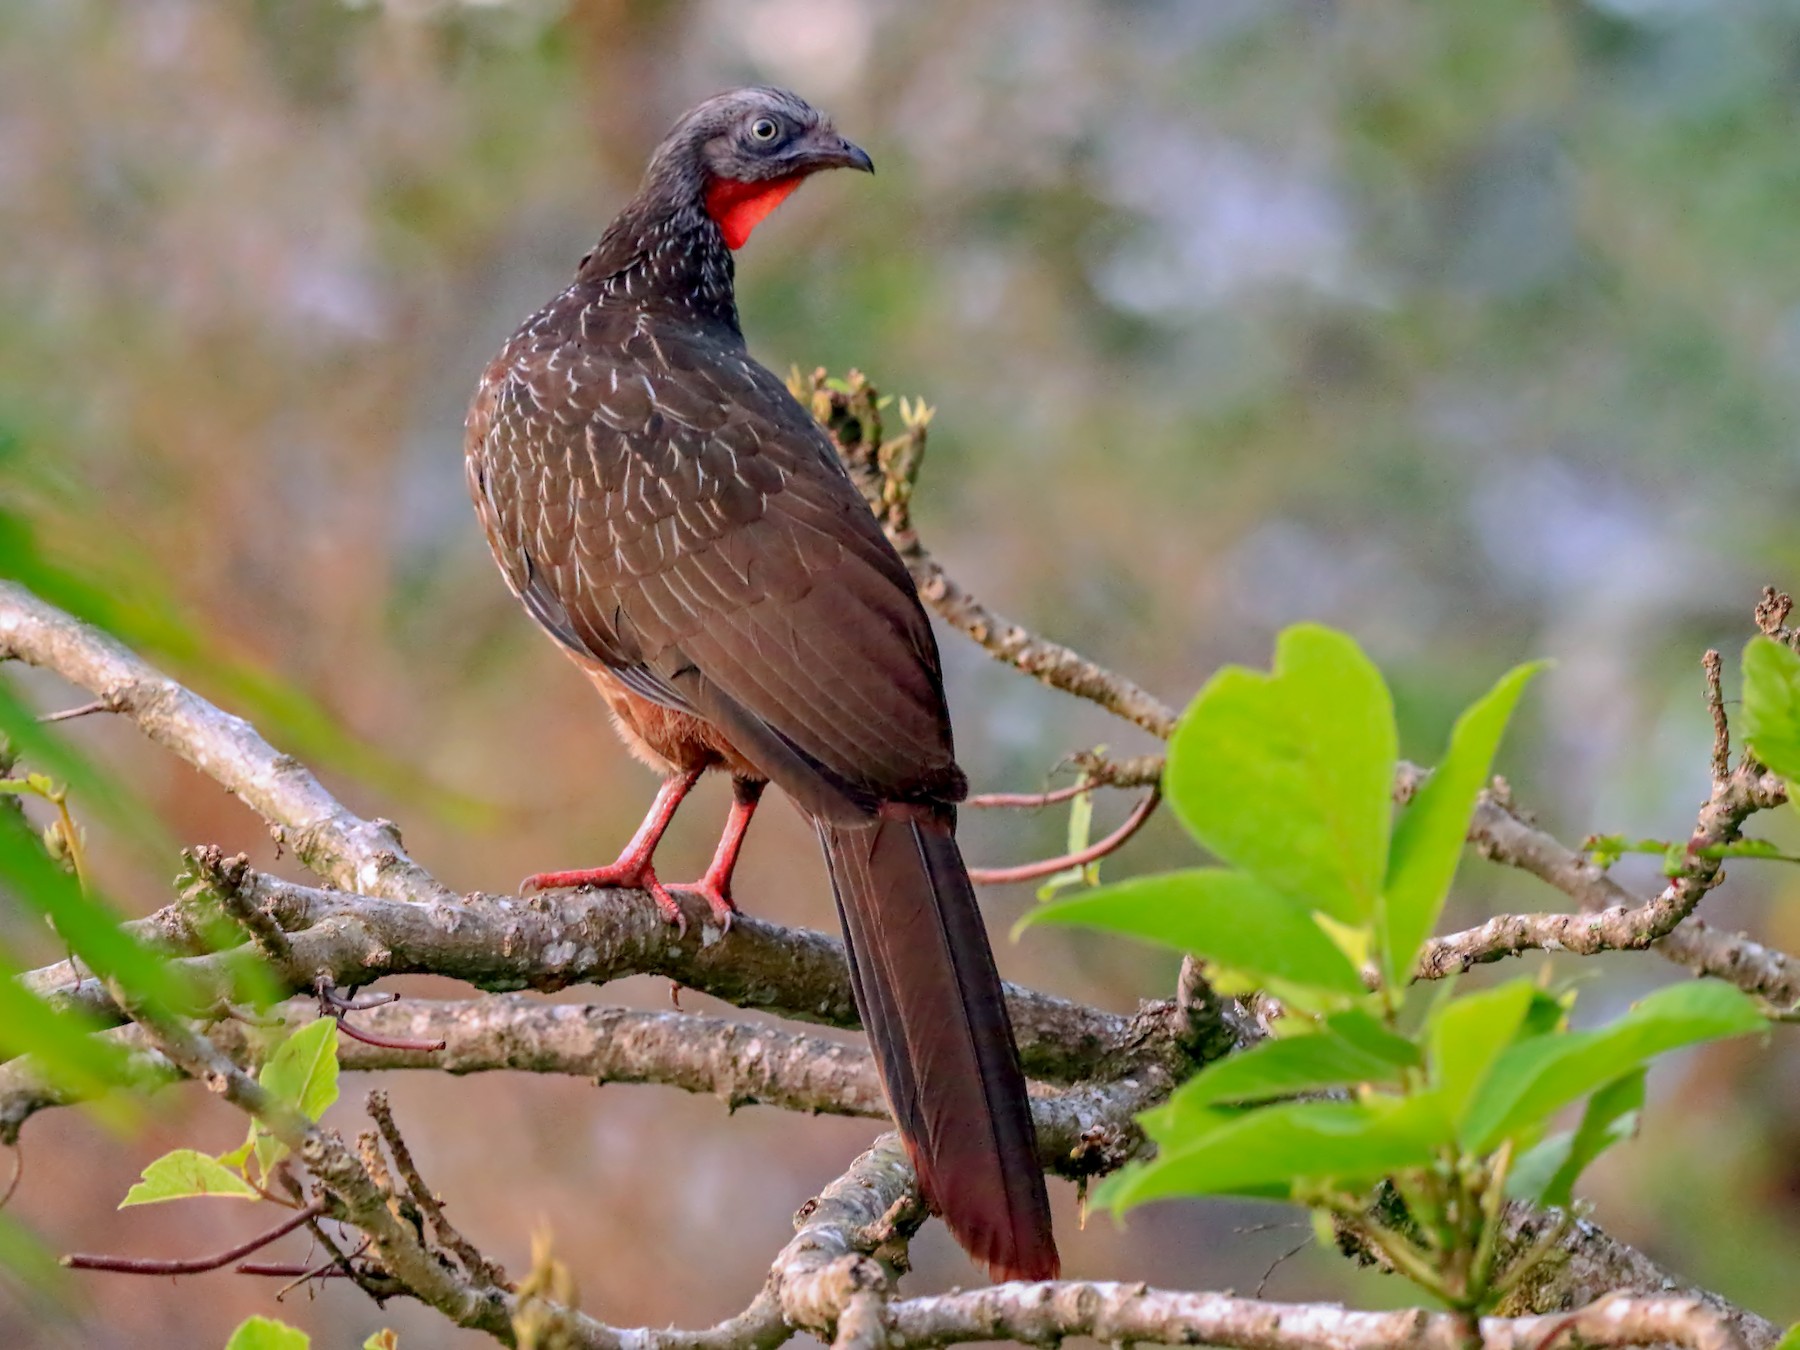 Band-tailed Guan - Phillip Edwards